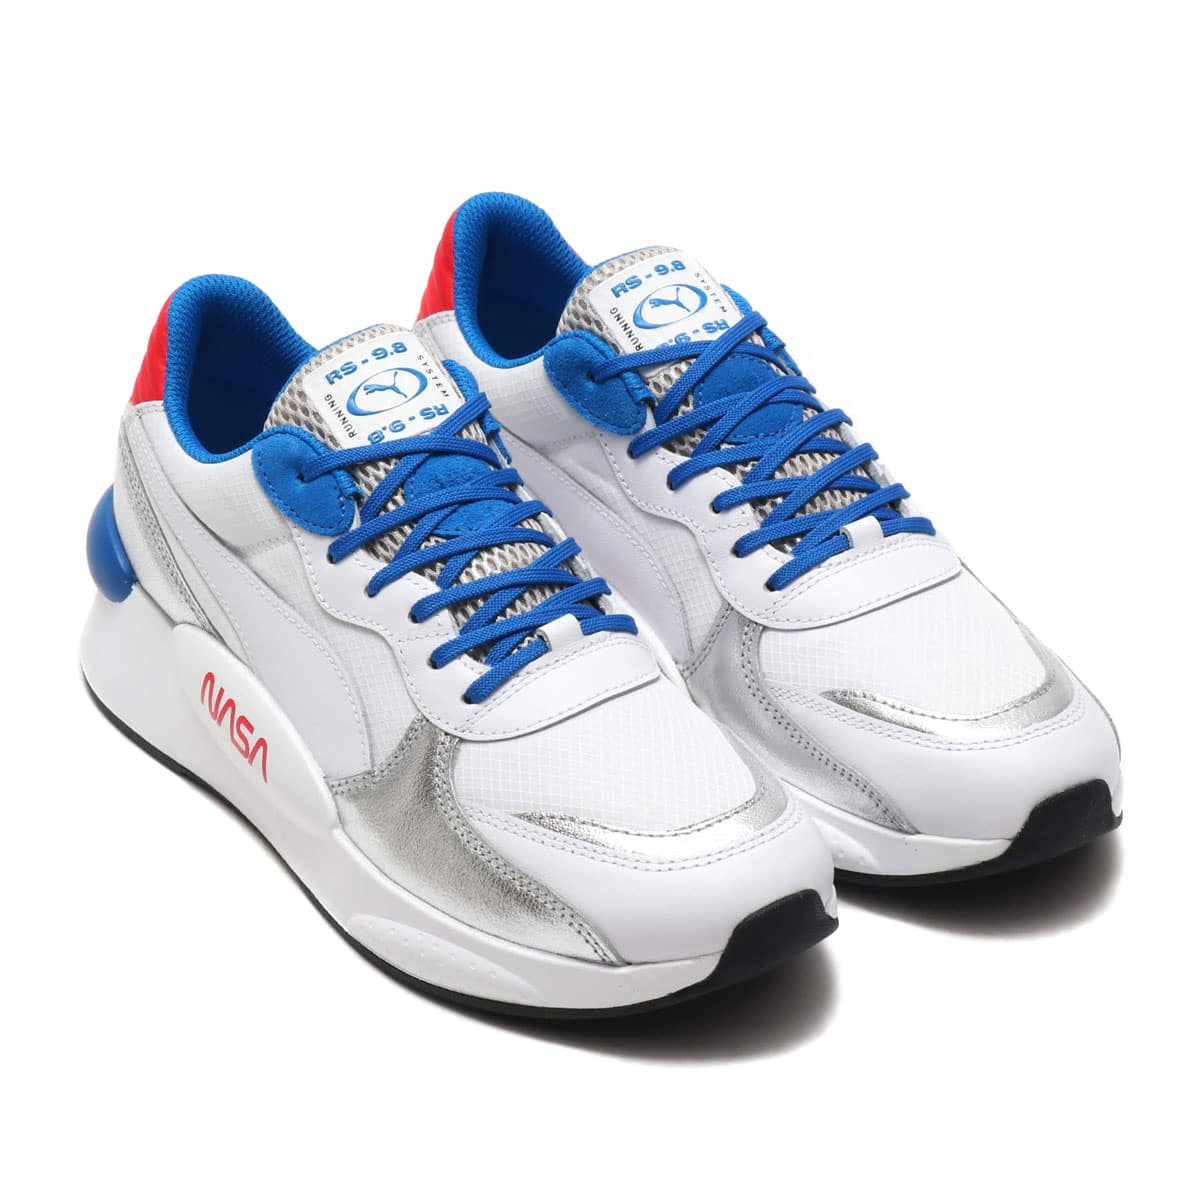 anchor let's do it Unite PUMA RS 9.8 SPACE AGENCY WHITE 19FA-S